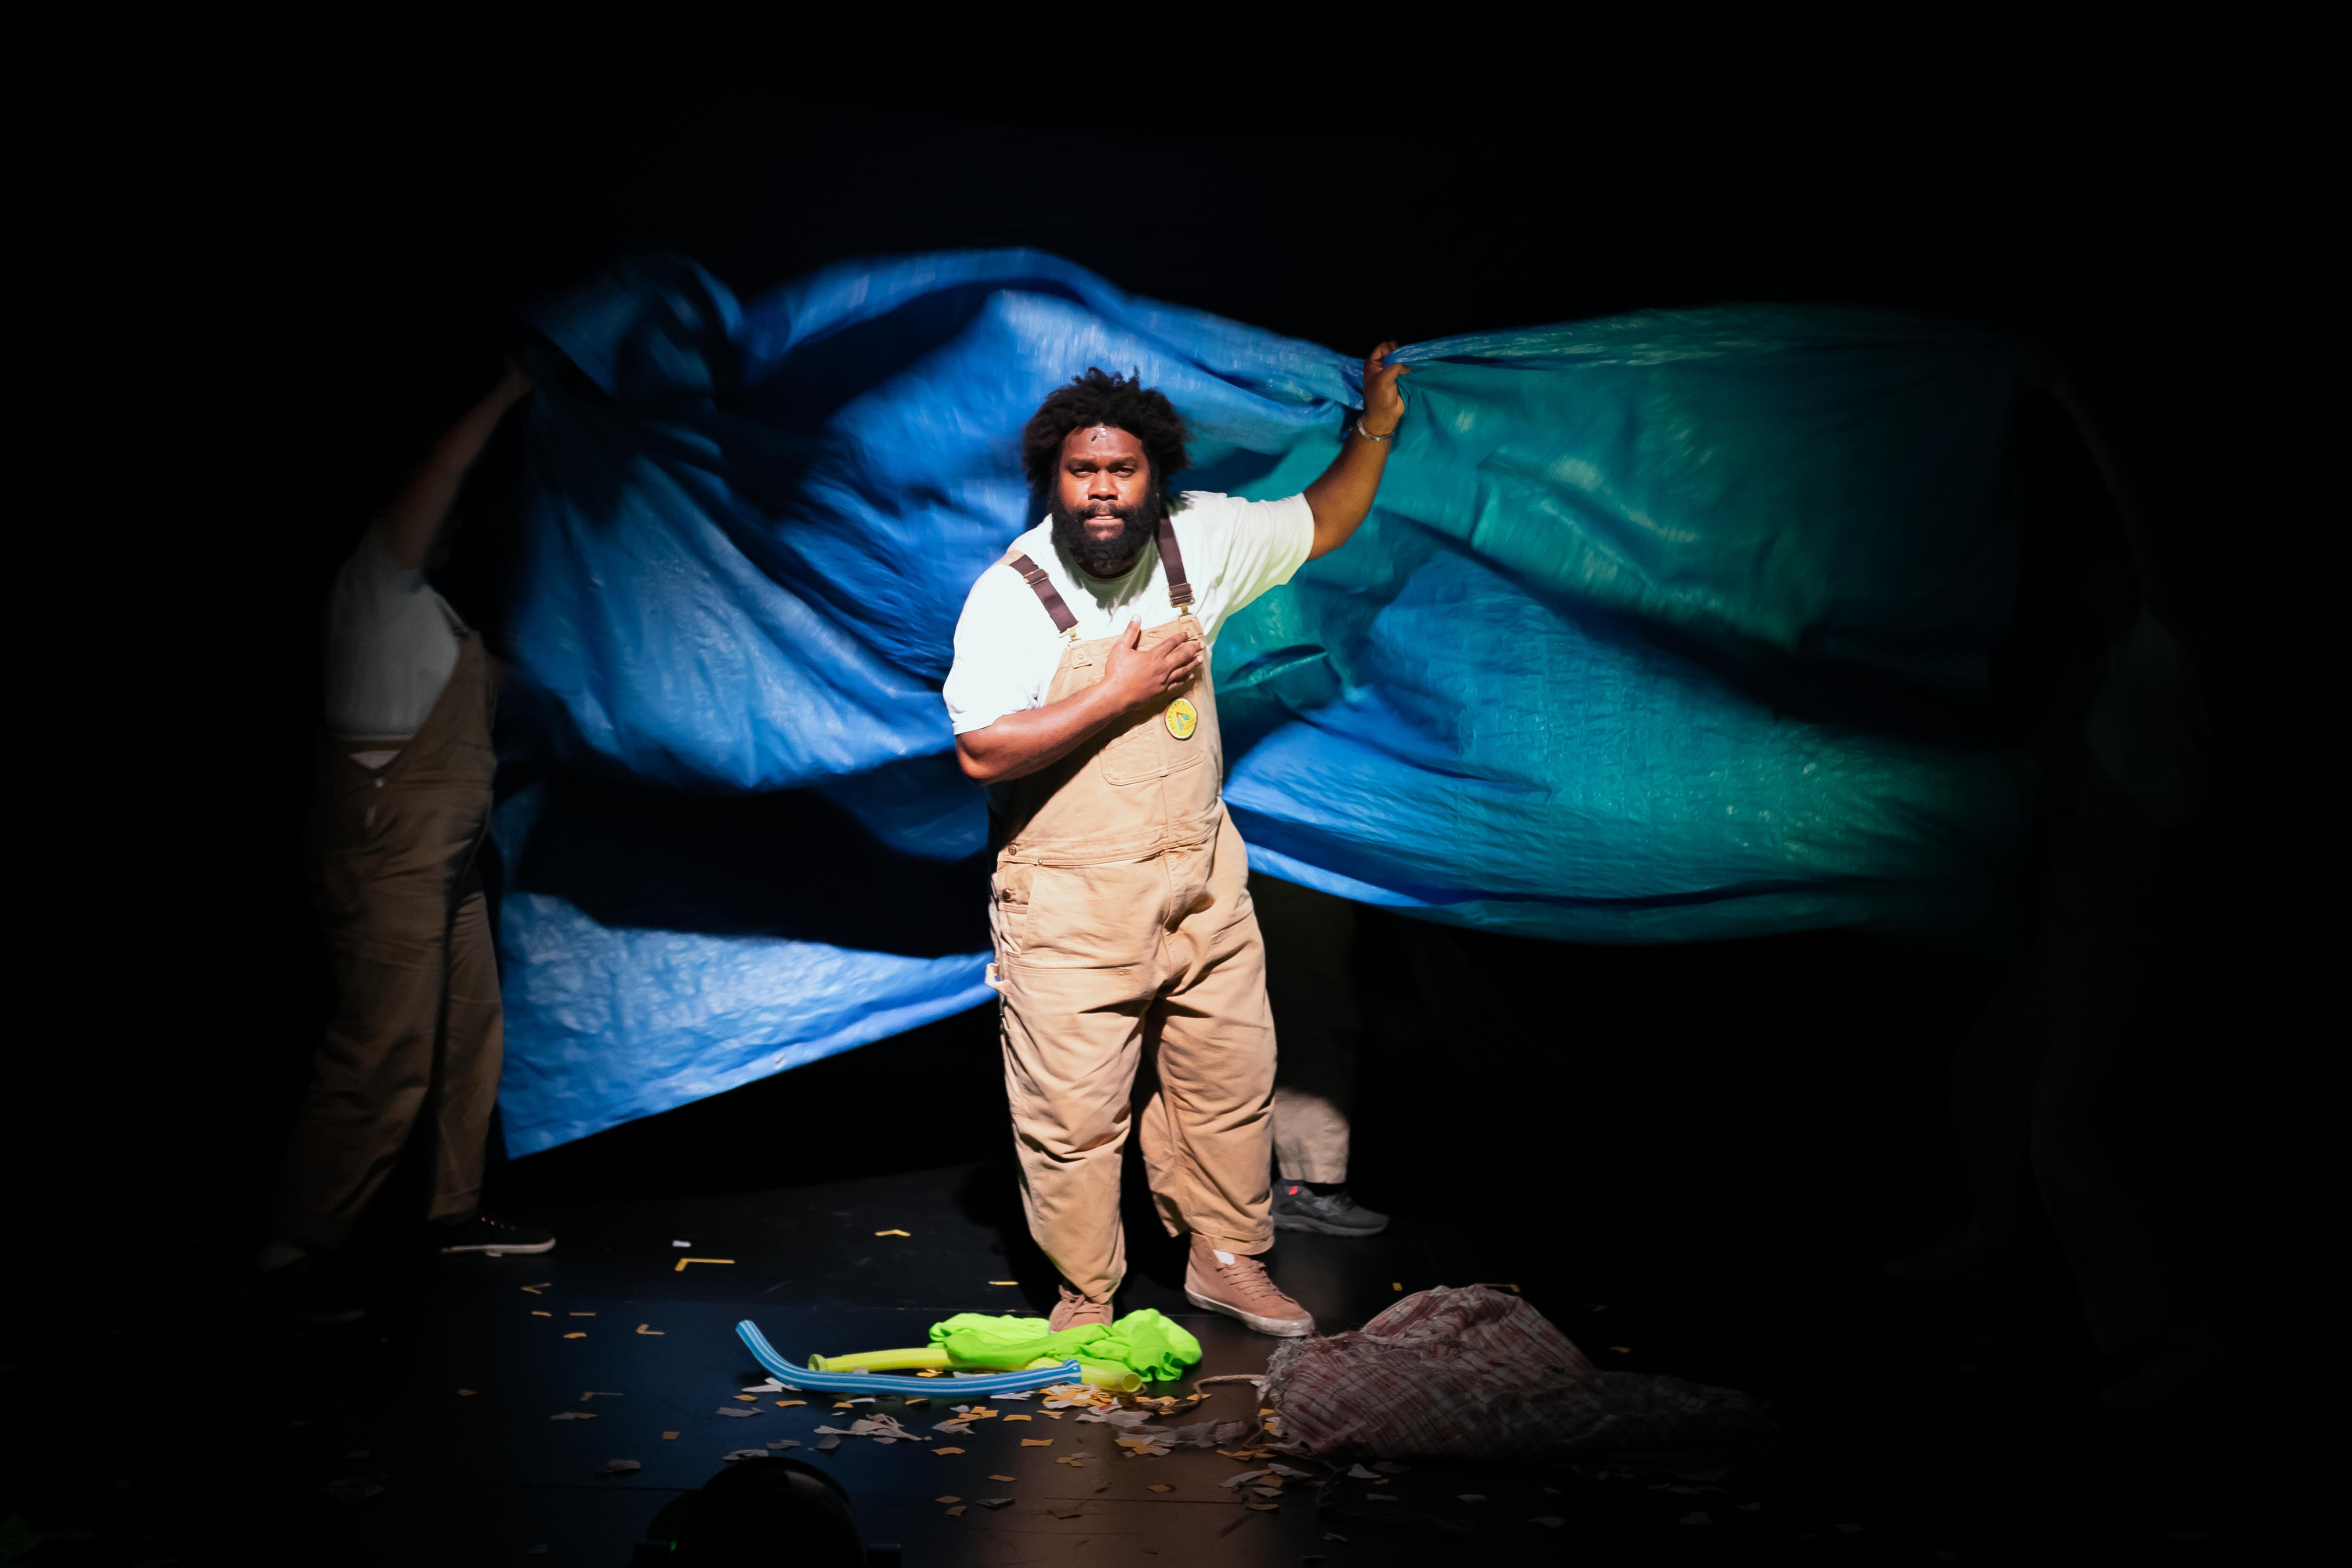 Indigenous man wearing caramel overalls stands on a darkened stage with his hand to his heart and flanked by a blue tarp.